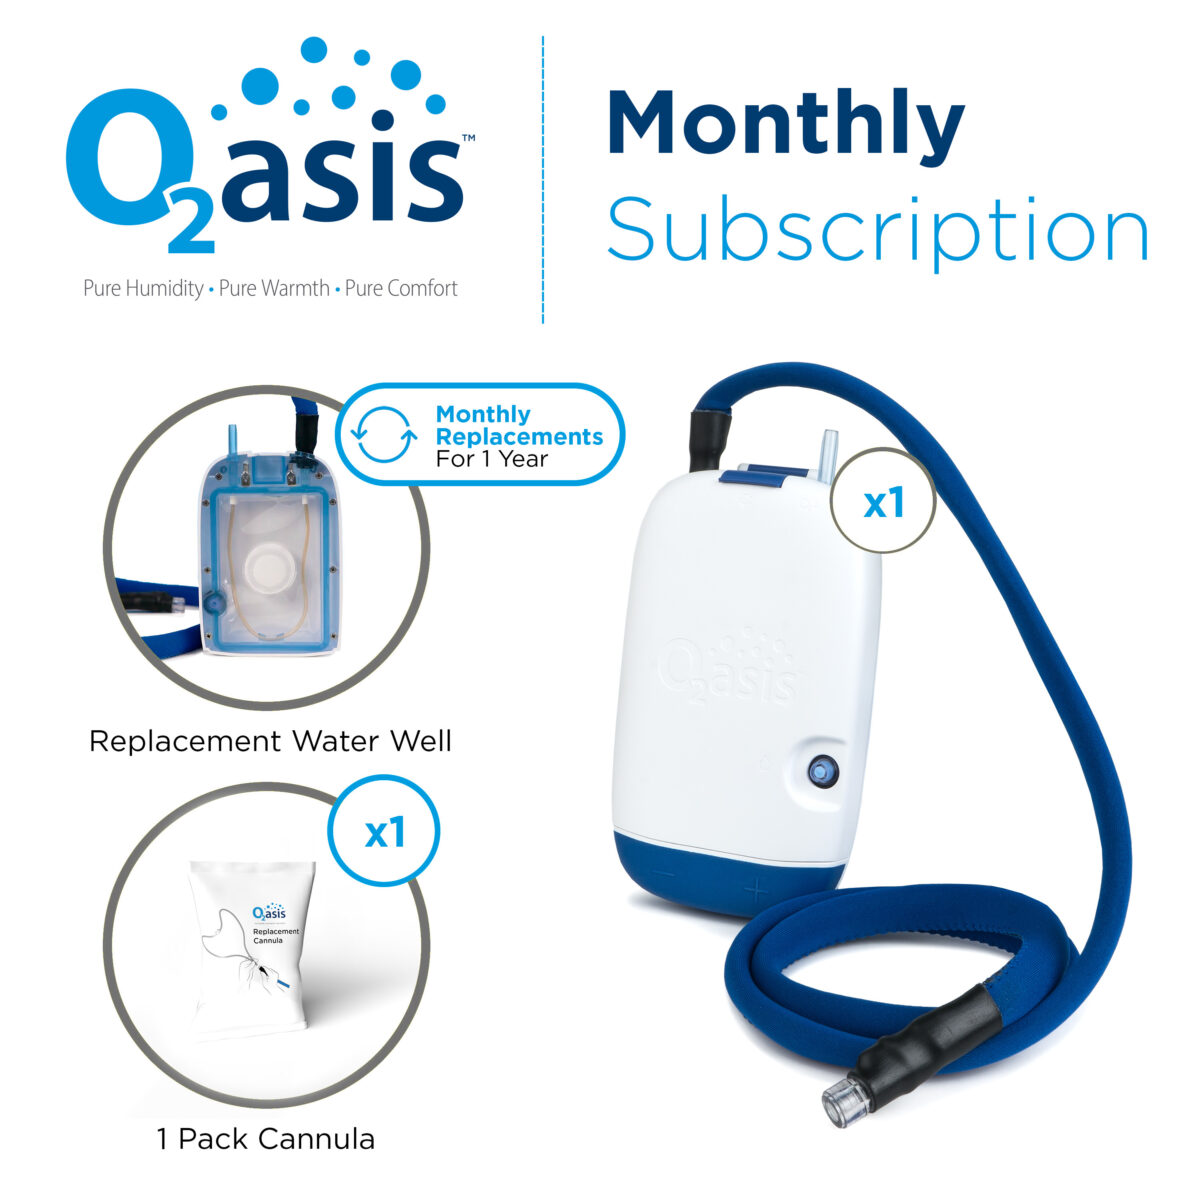 O2asis Monthly Subscription